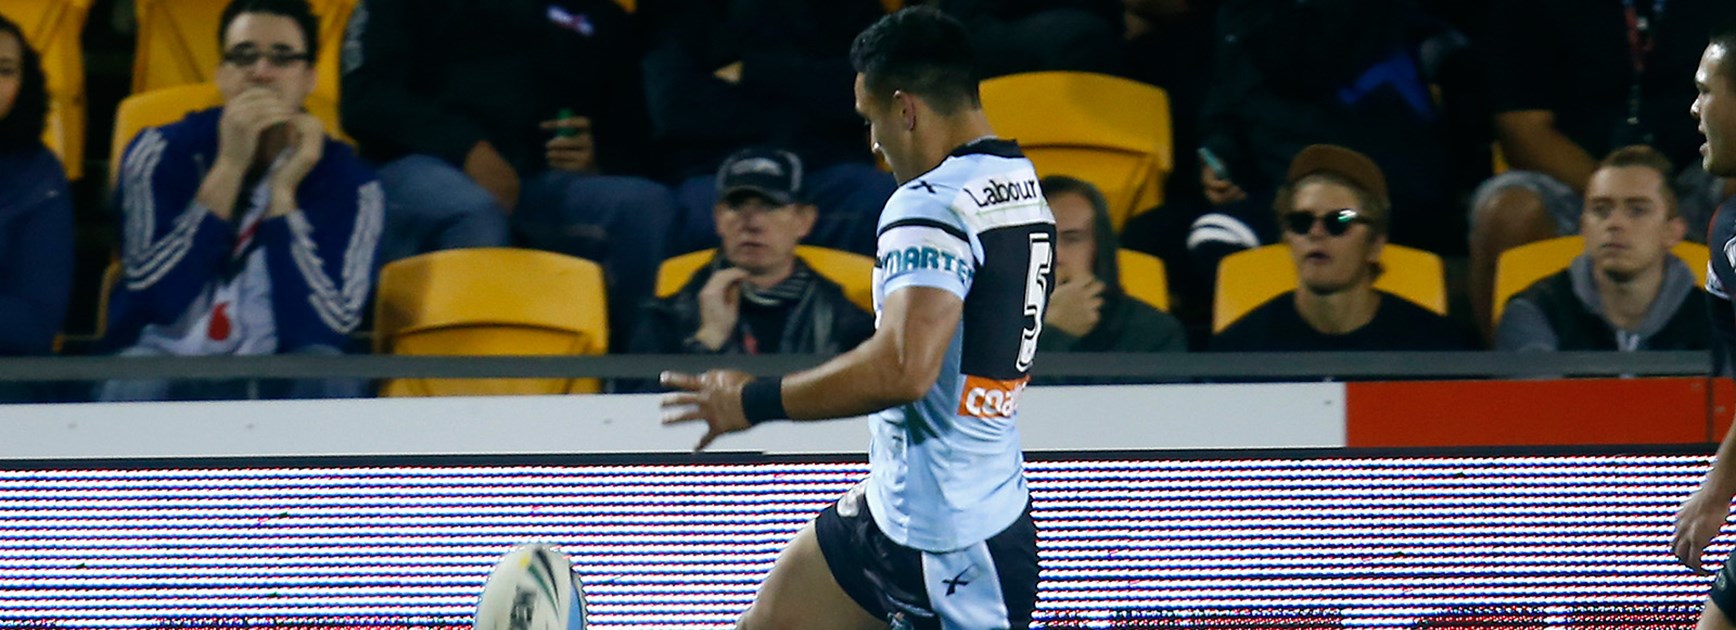 Valentine Holmes puts in a kick for himself to score.